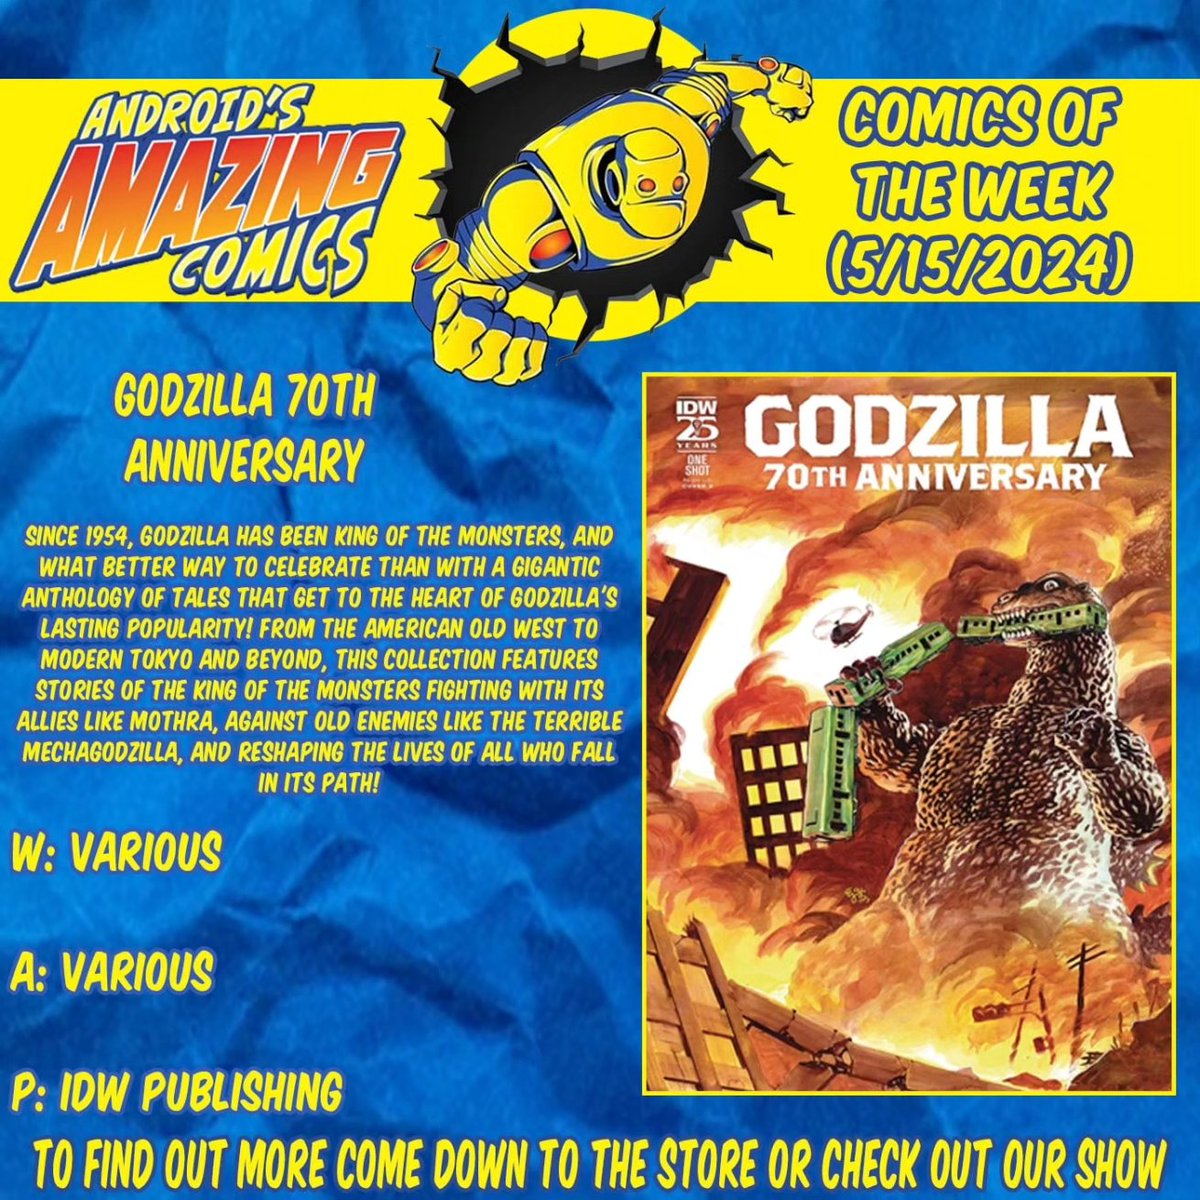 A new week means a new batch of comics! Here are our picks! GODZILLA 70TH ANNIVERSARY W: Various A: Various P: @IDWPublishing #picksoftheweek #newproduct #newinstock #comicbooks #comics #NCBD #idwpublishing #godzilla #70thanniversary #kaiju #tokusatsu